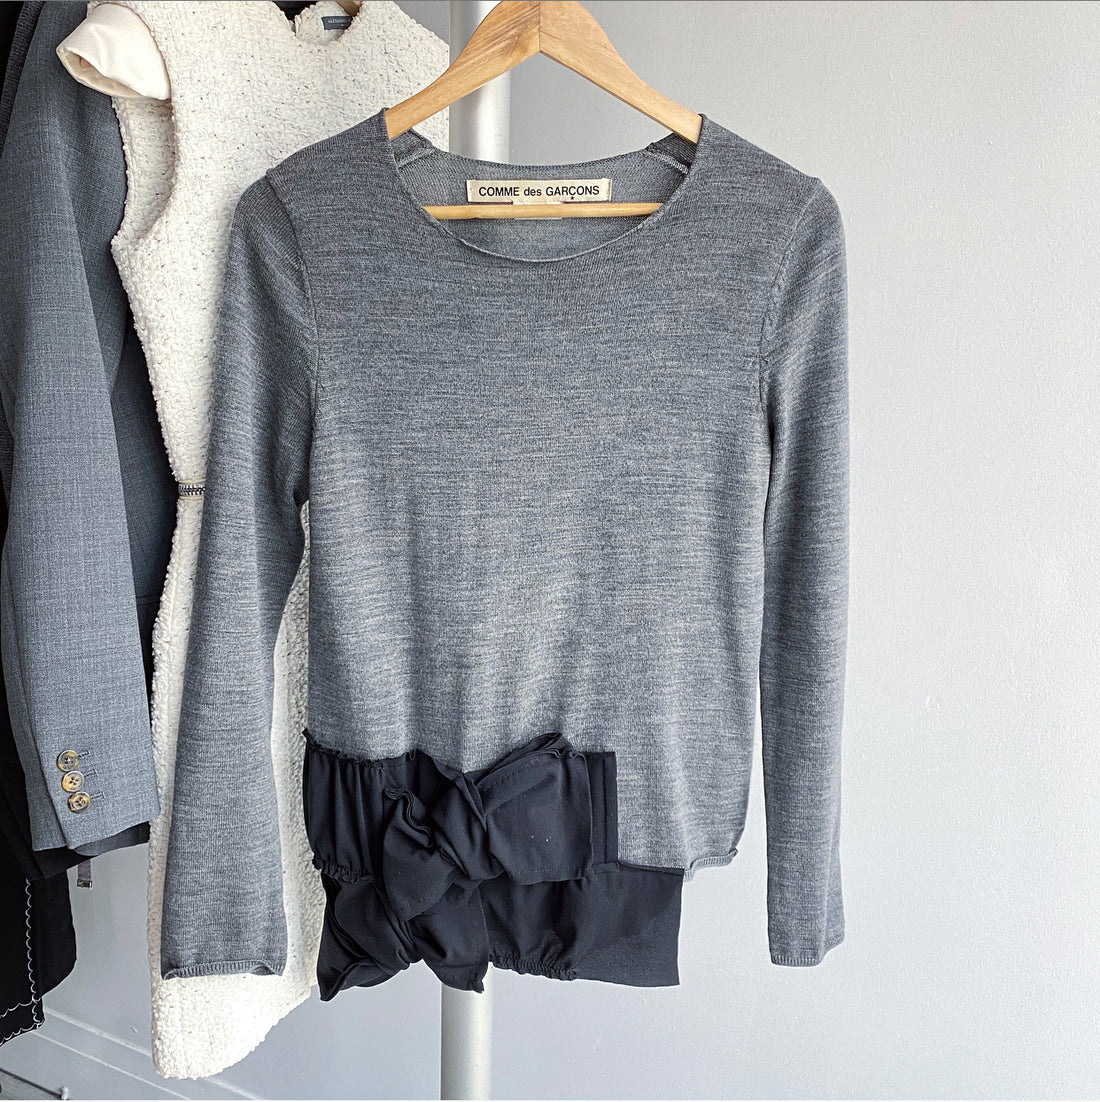 Comme des Garcons Grey Wool Knit Top with Black Detail - S